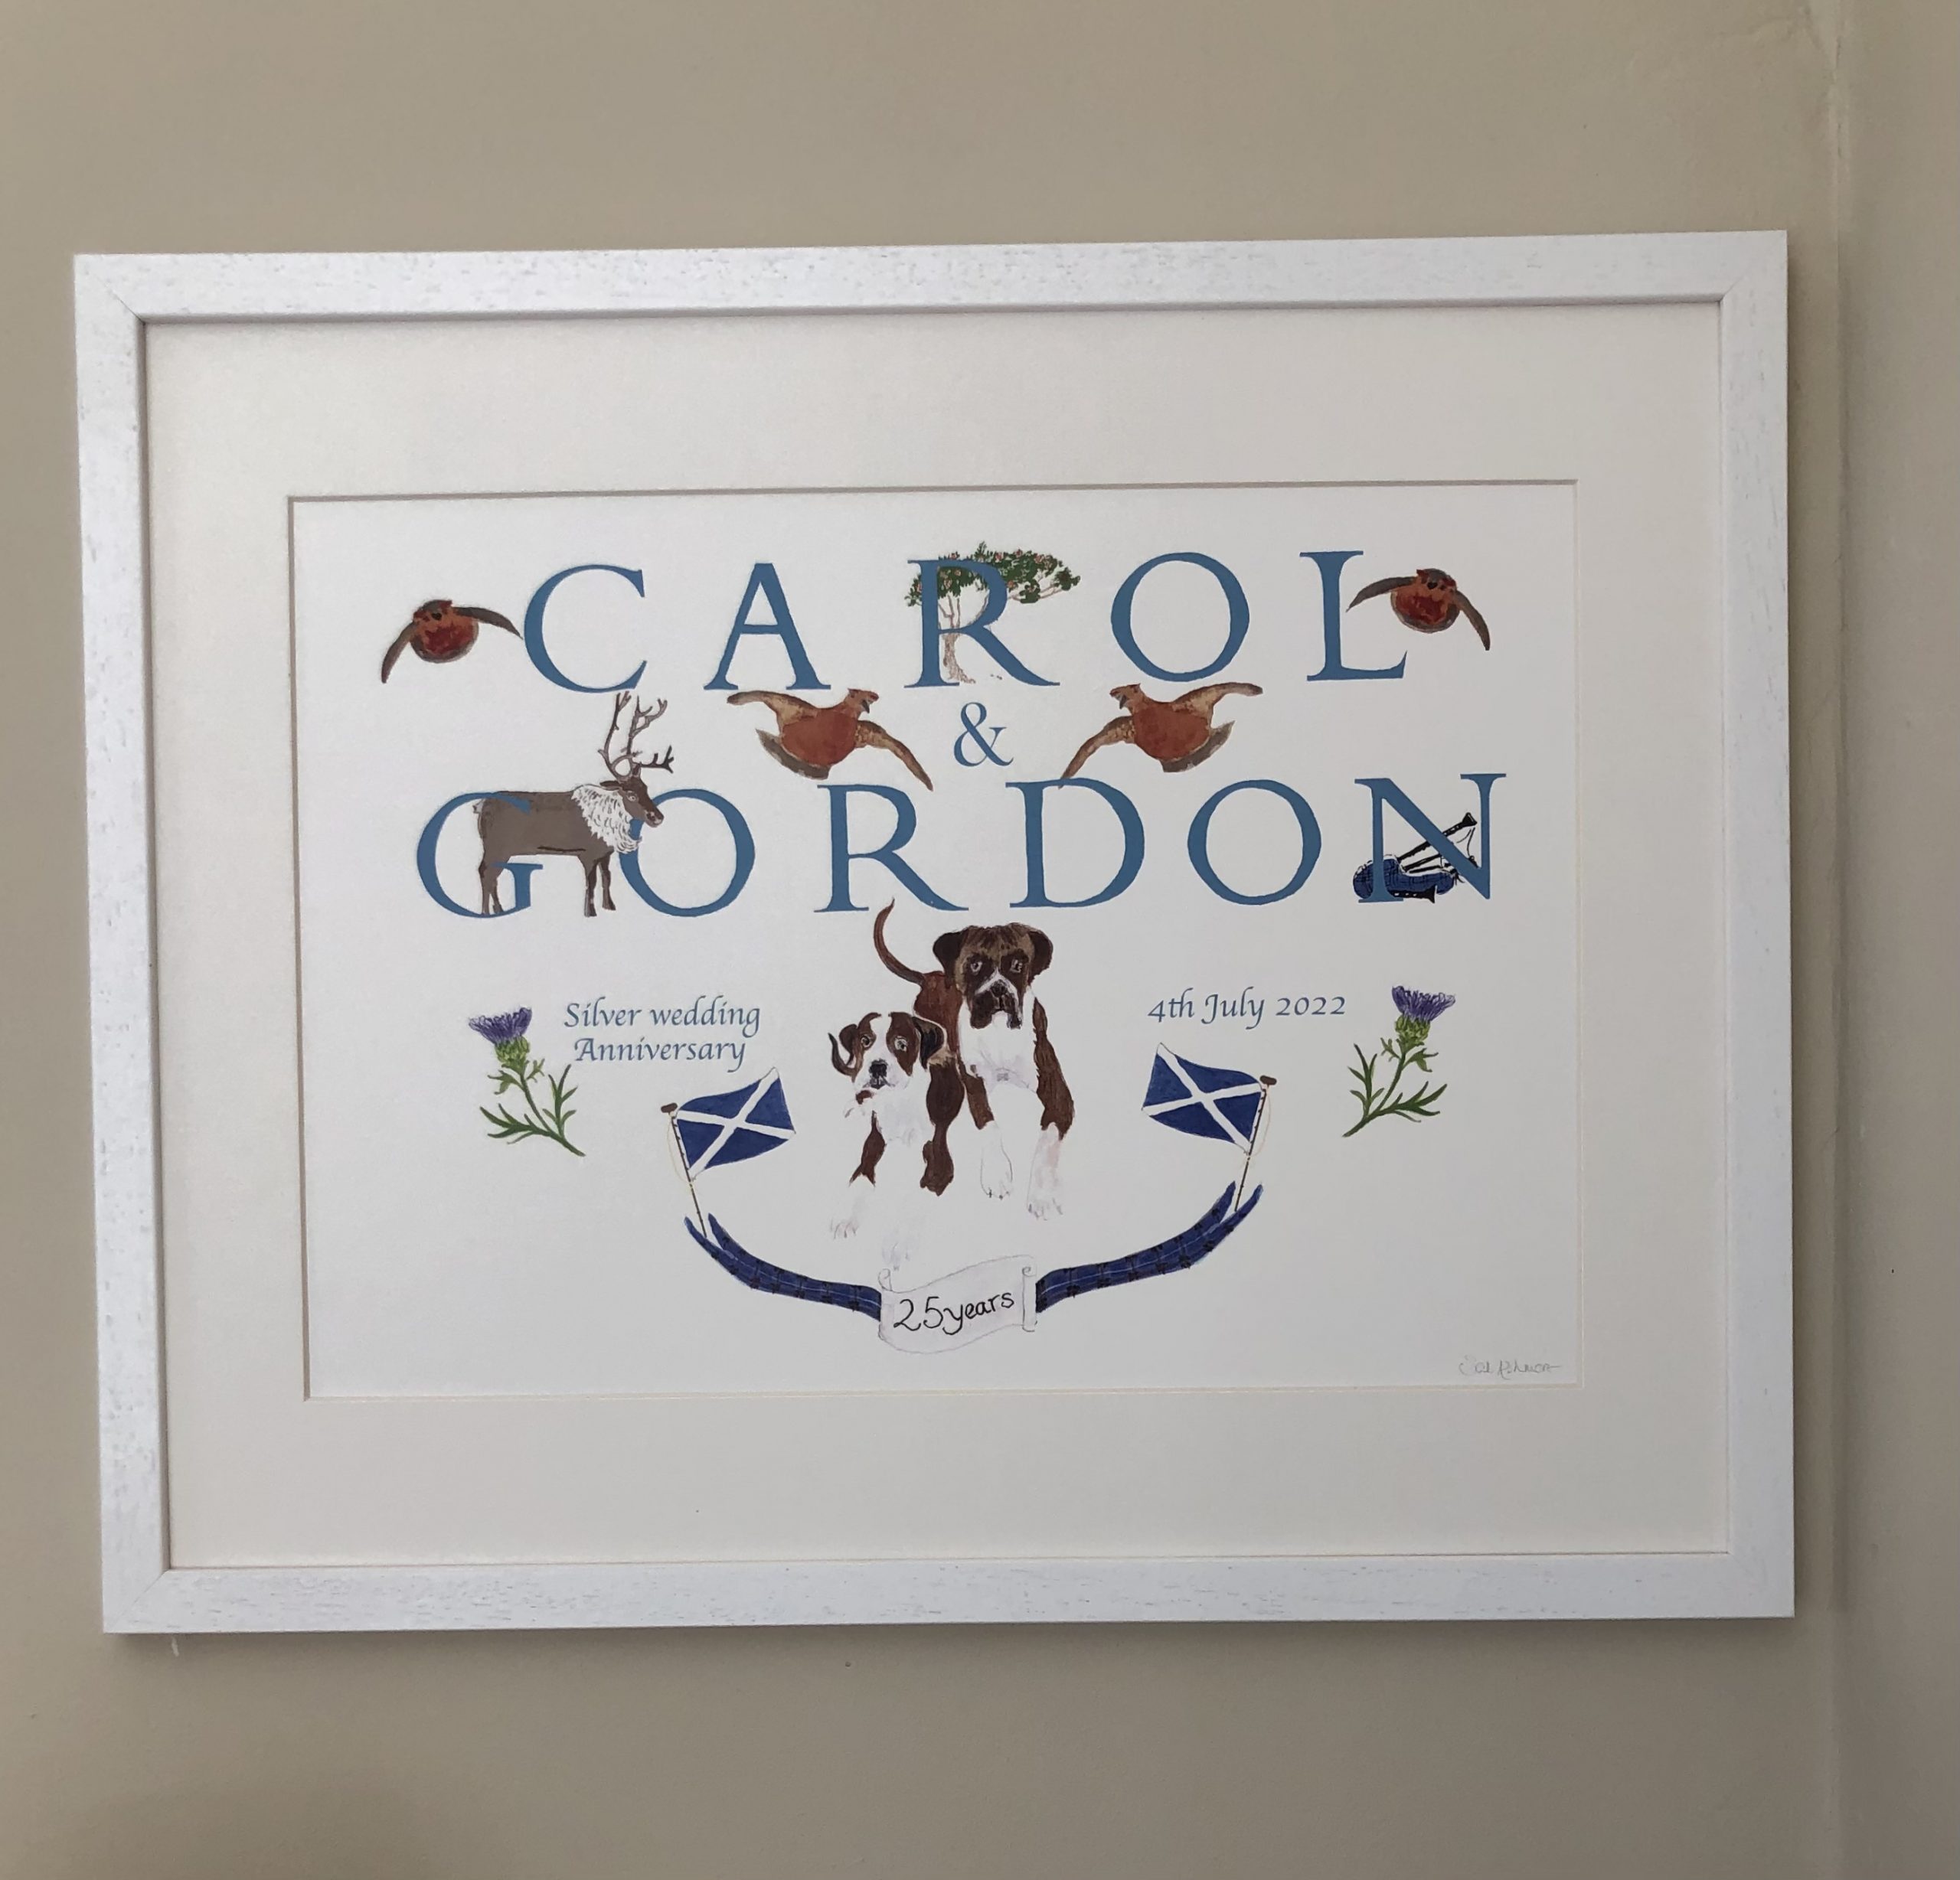 hand drawn illustrations celebrating Carol and Gordon's 25th wedding anniversary - the illustrations they choose are all related to Scotland: thistle; the flag of Scotland; partridge and a deer; tartan ribbon and their own boxer dogs. The text is of their names and the date of their silver wedding anniversary